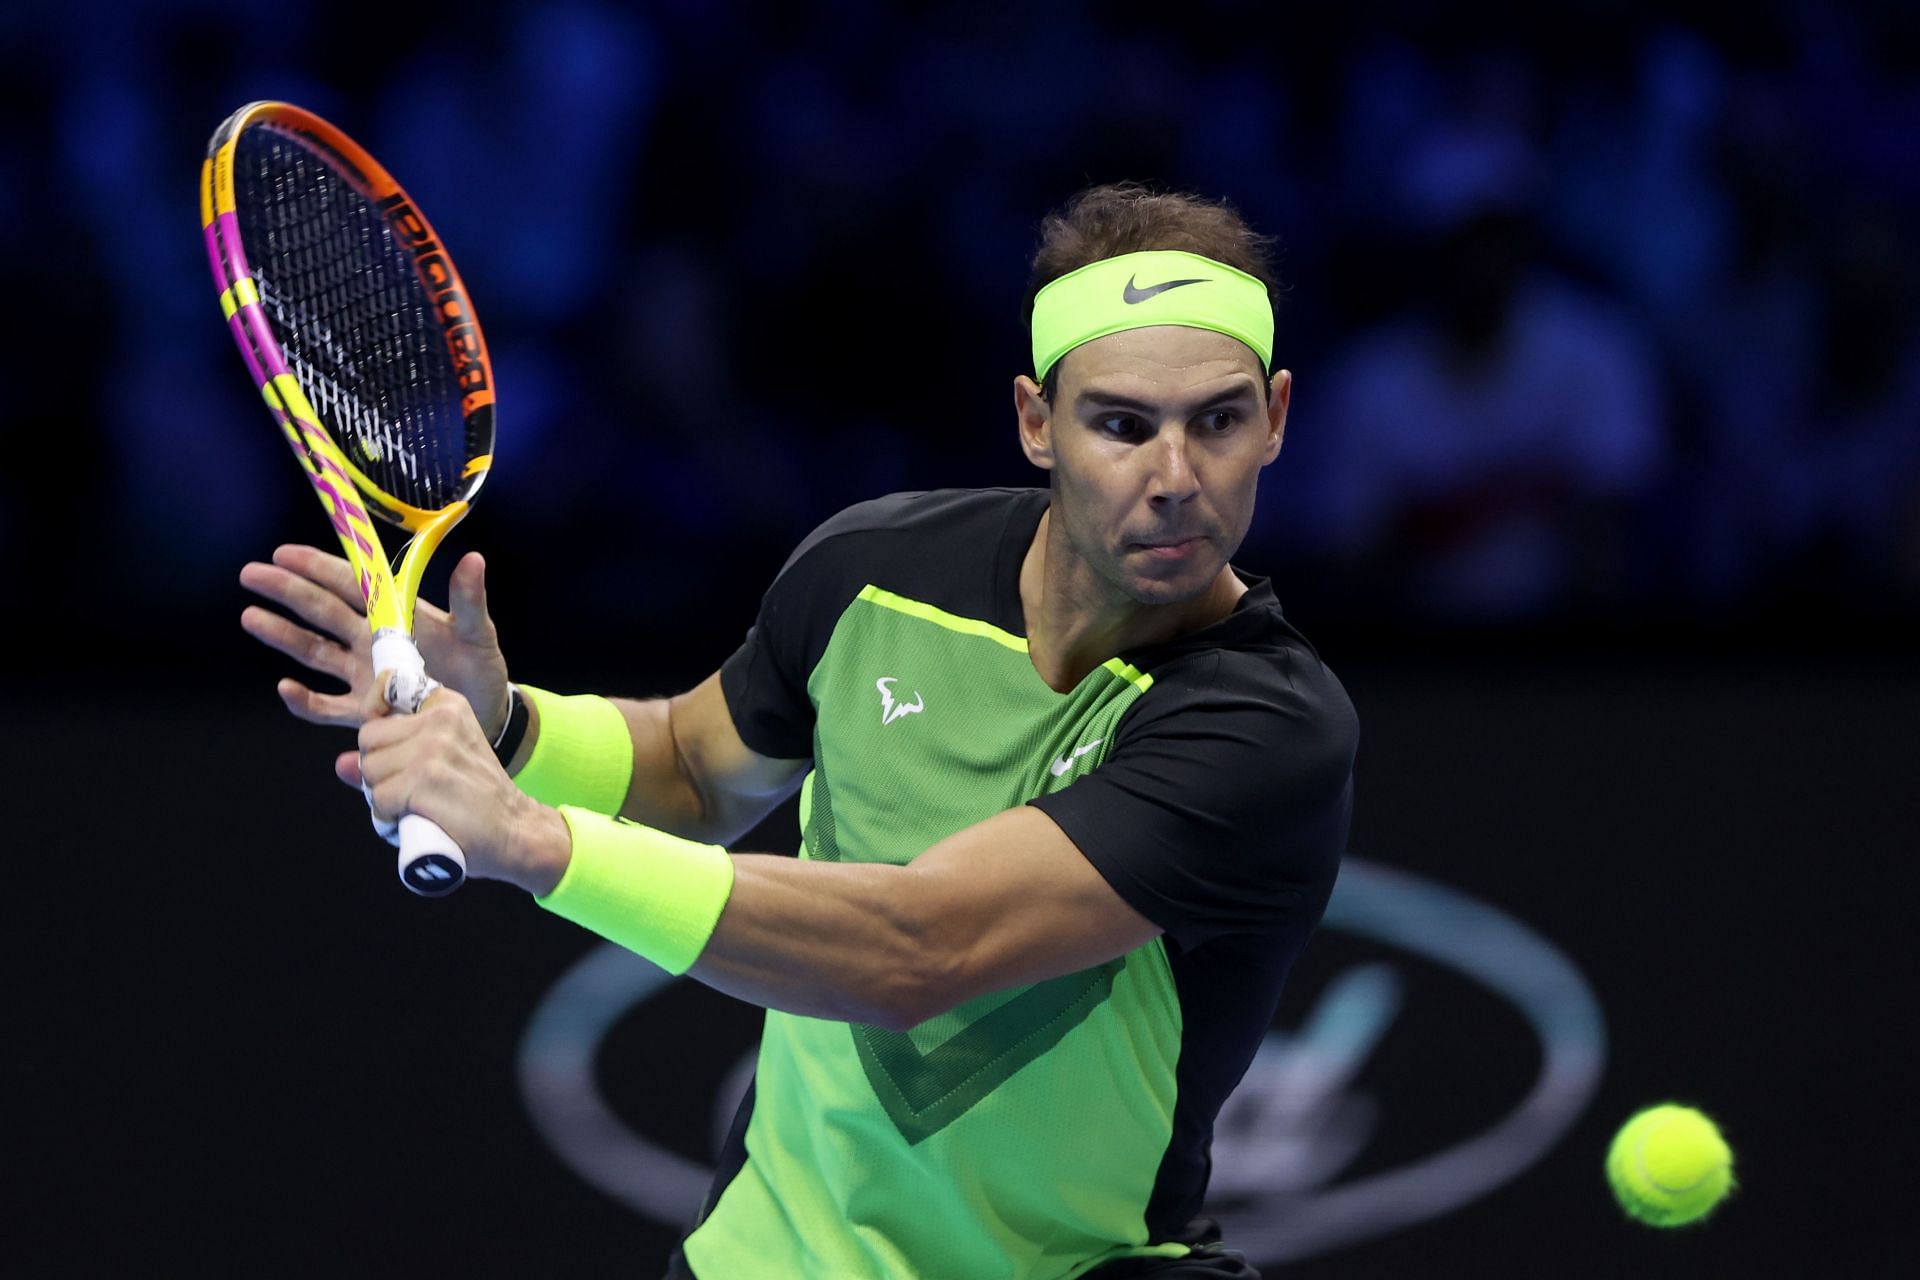 Nadal heads back home after Turin exit